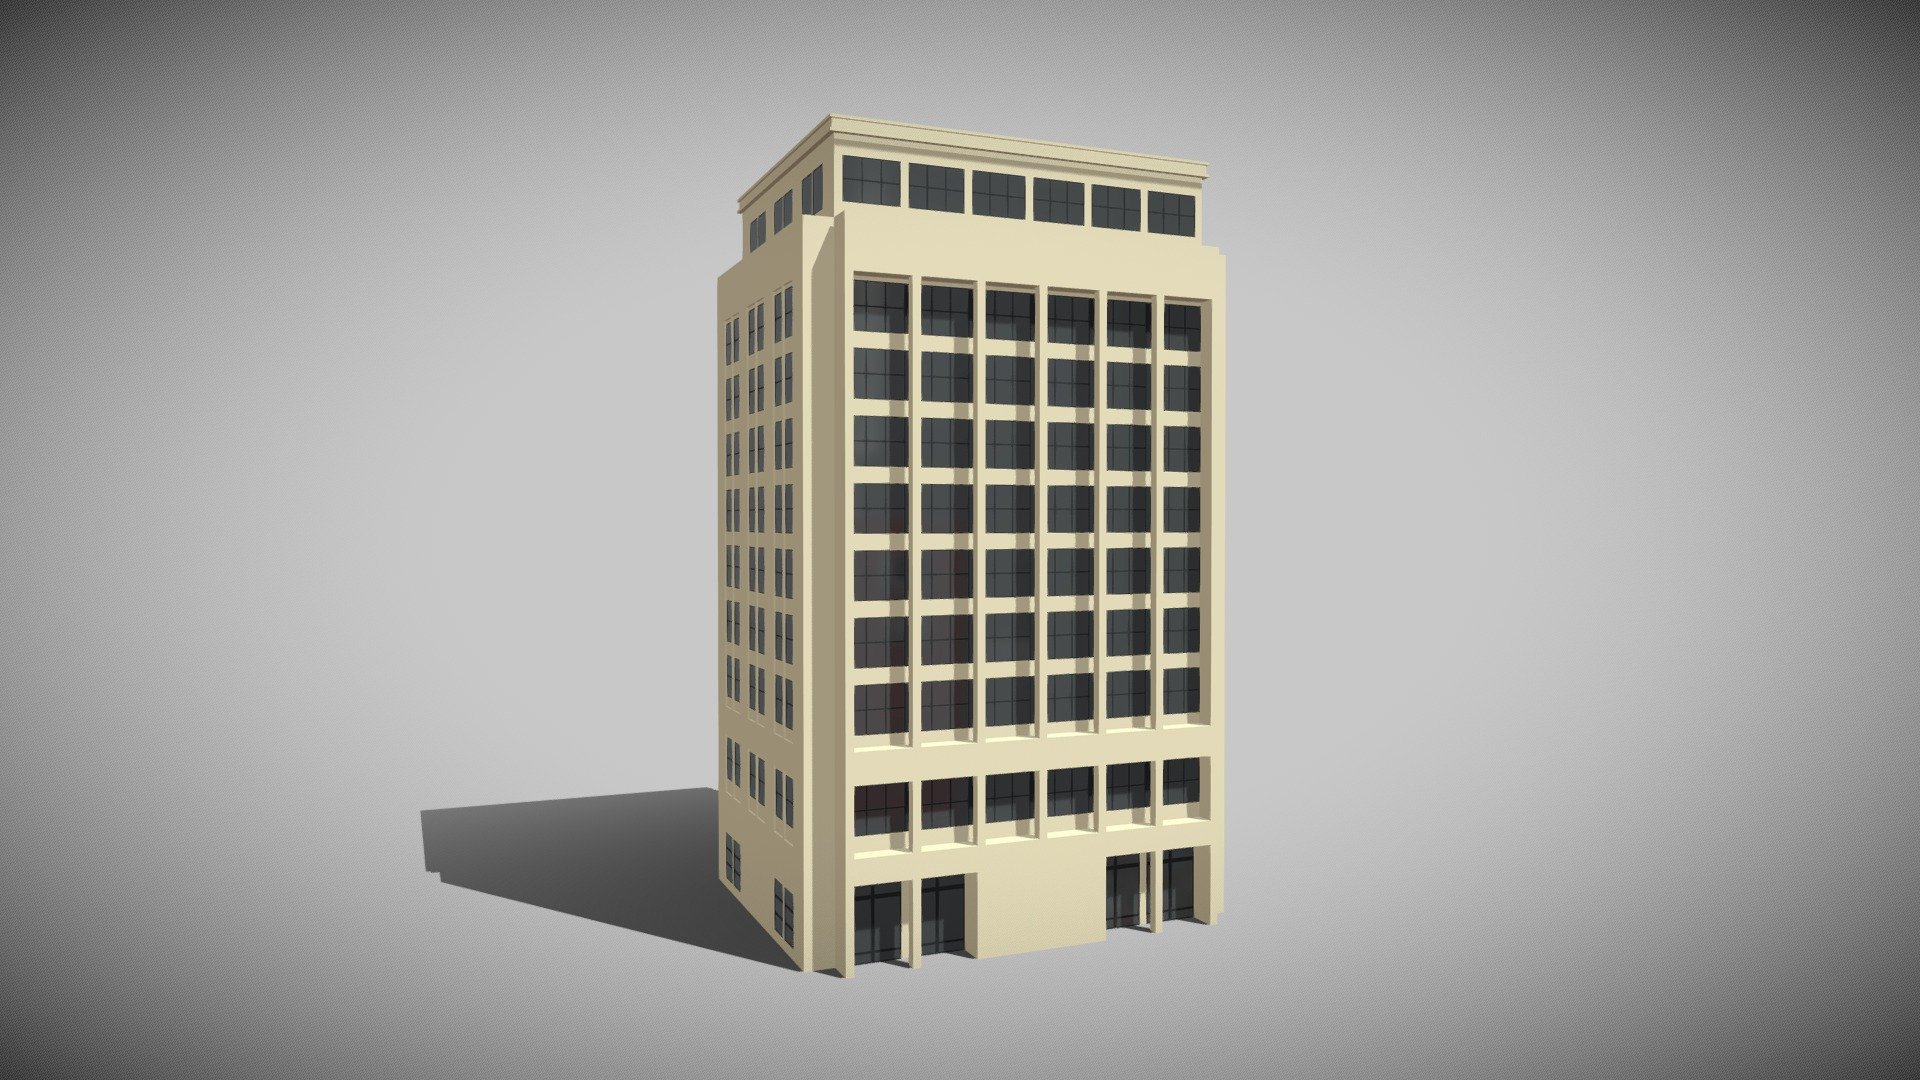 Detailed model of a Commercial Building with no interior, modeled in Cinema 4D.The model was created using approximate real world dimensions.

The model has 15,225 polys and 18,184 vertices.

An additional file has been provided containing the original Cinema 4D project files and other 3d export files such as 3ds, fbx and obj 3d model